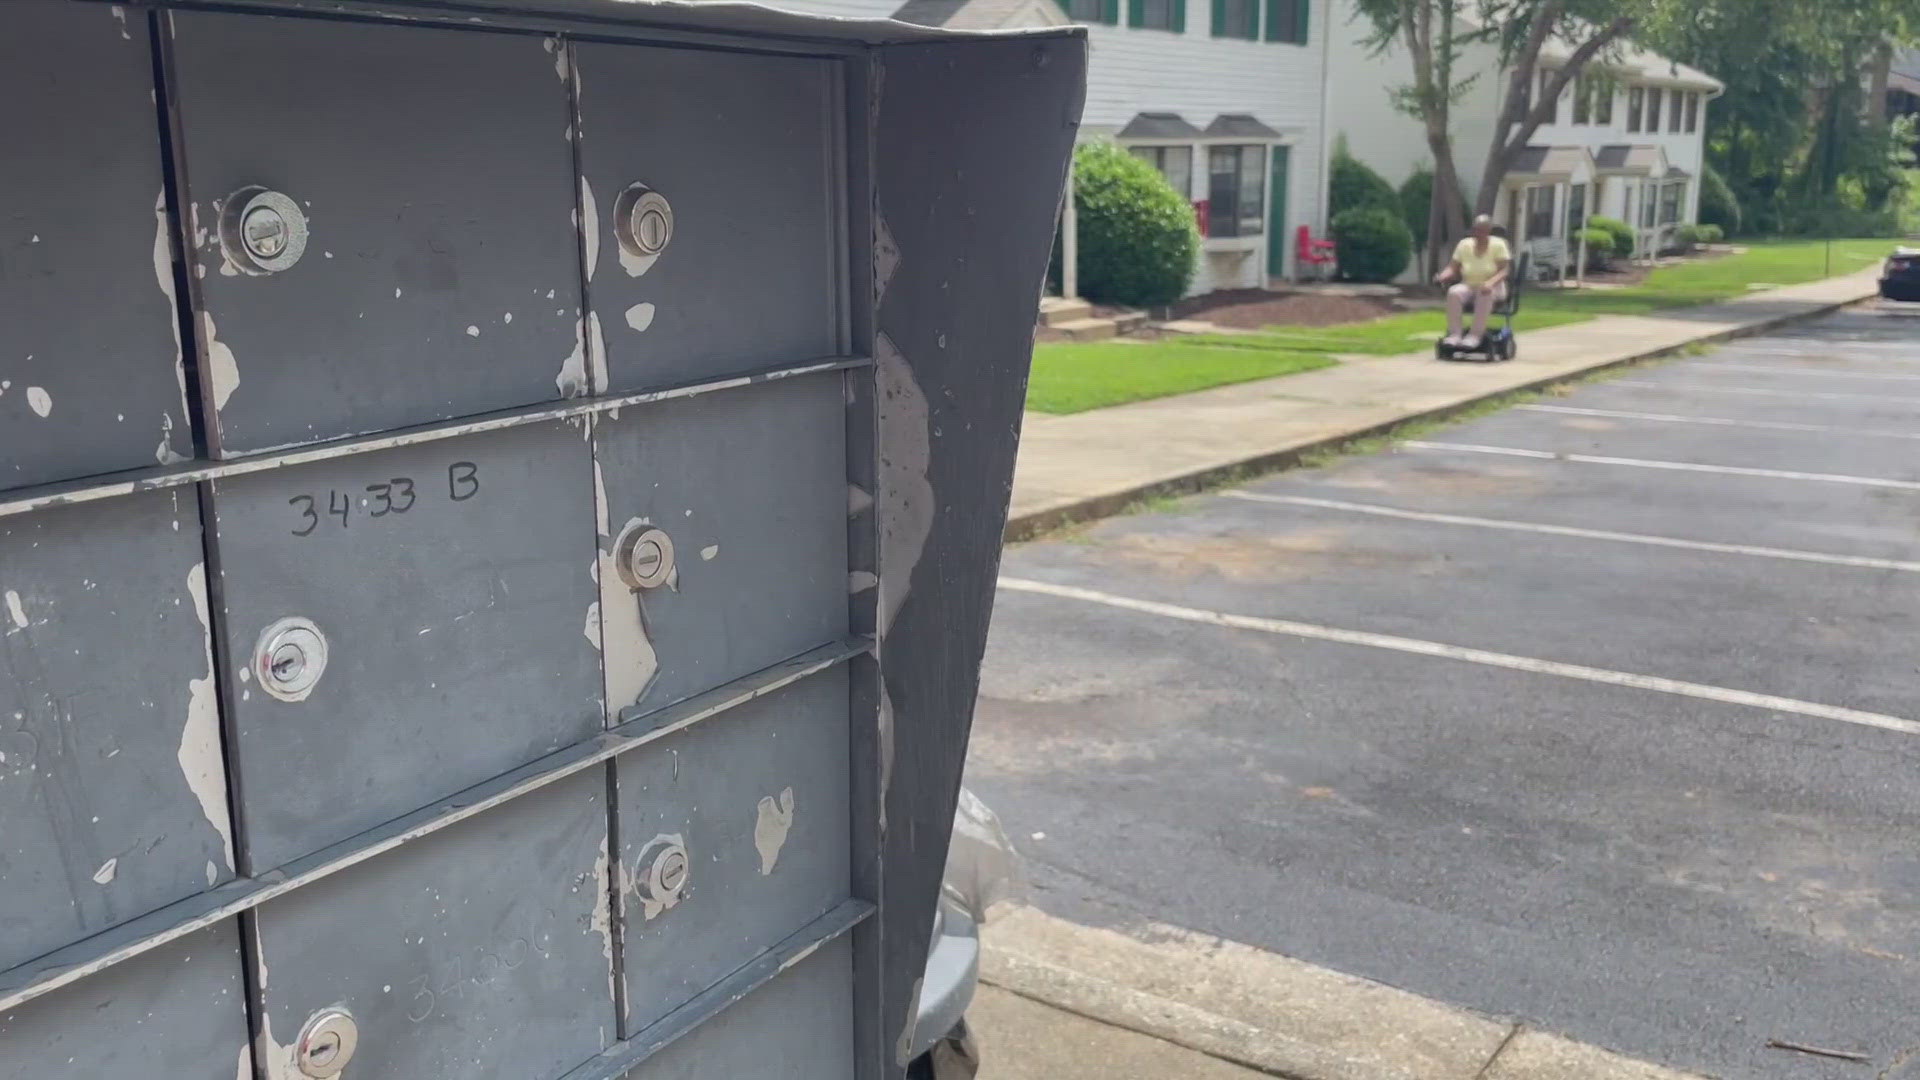 No one fixed her mailbox for months.